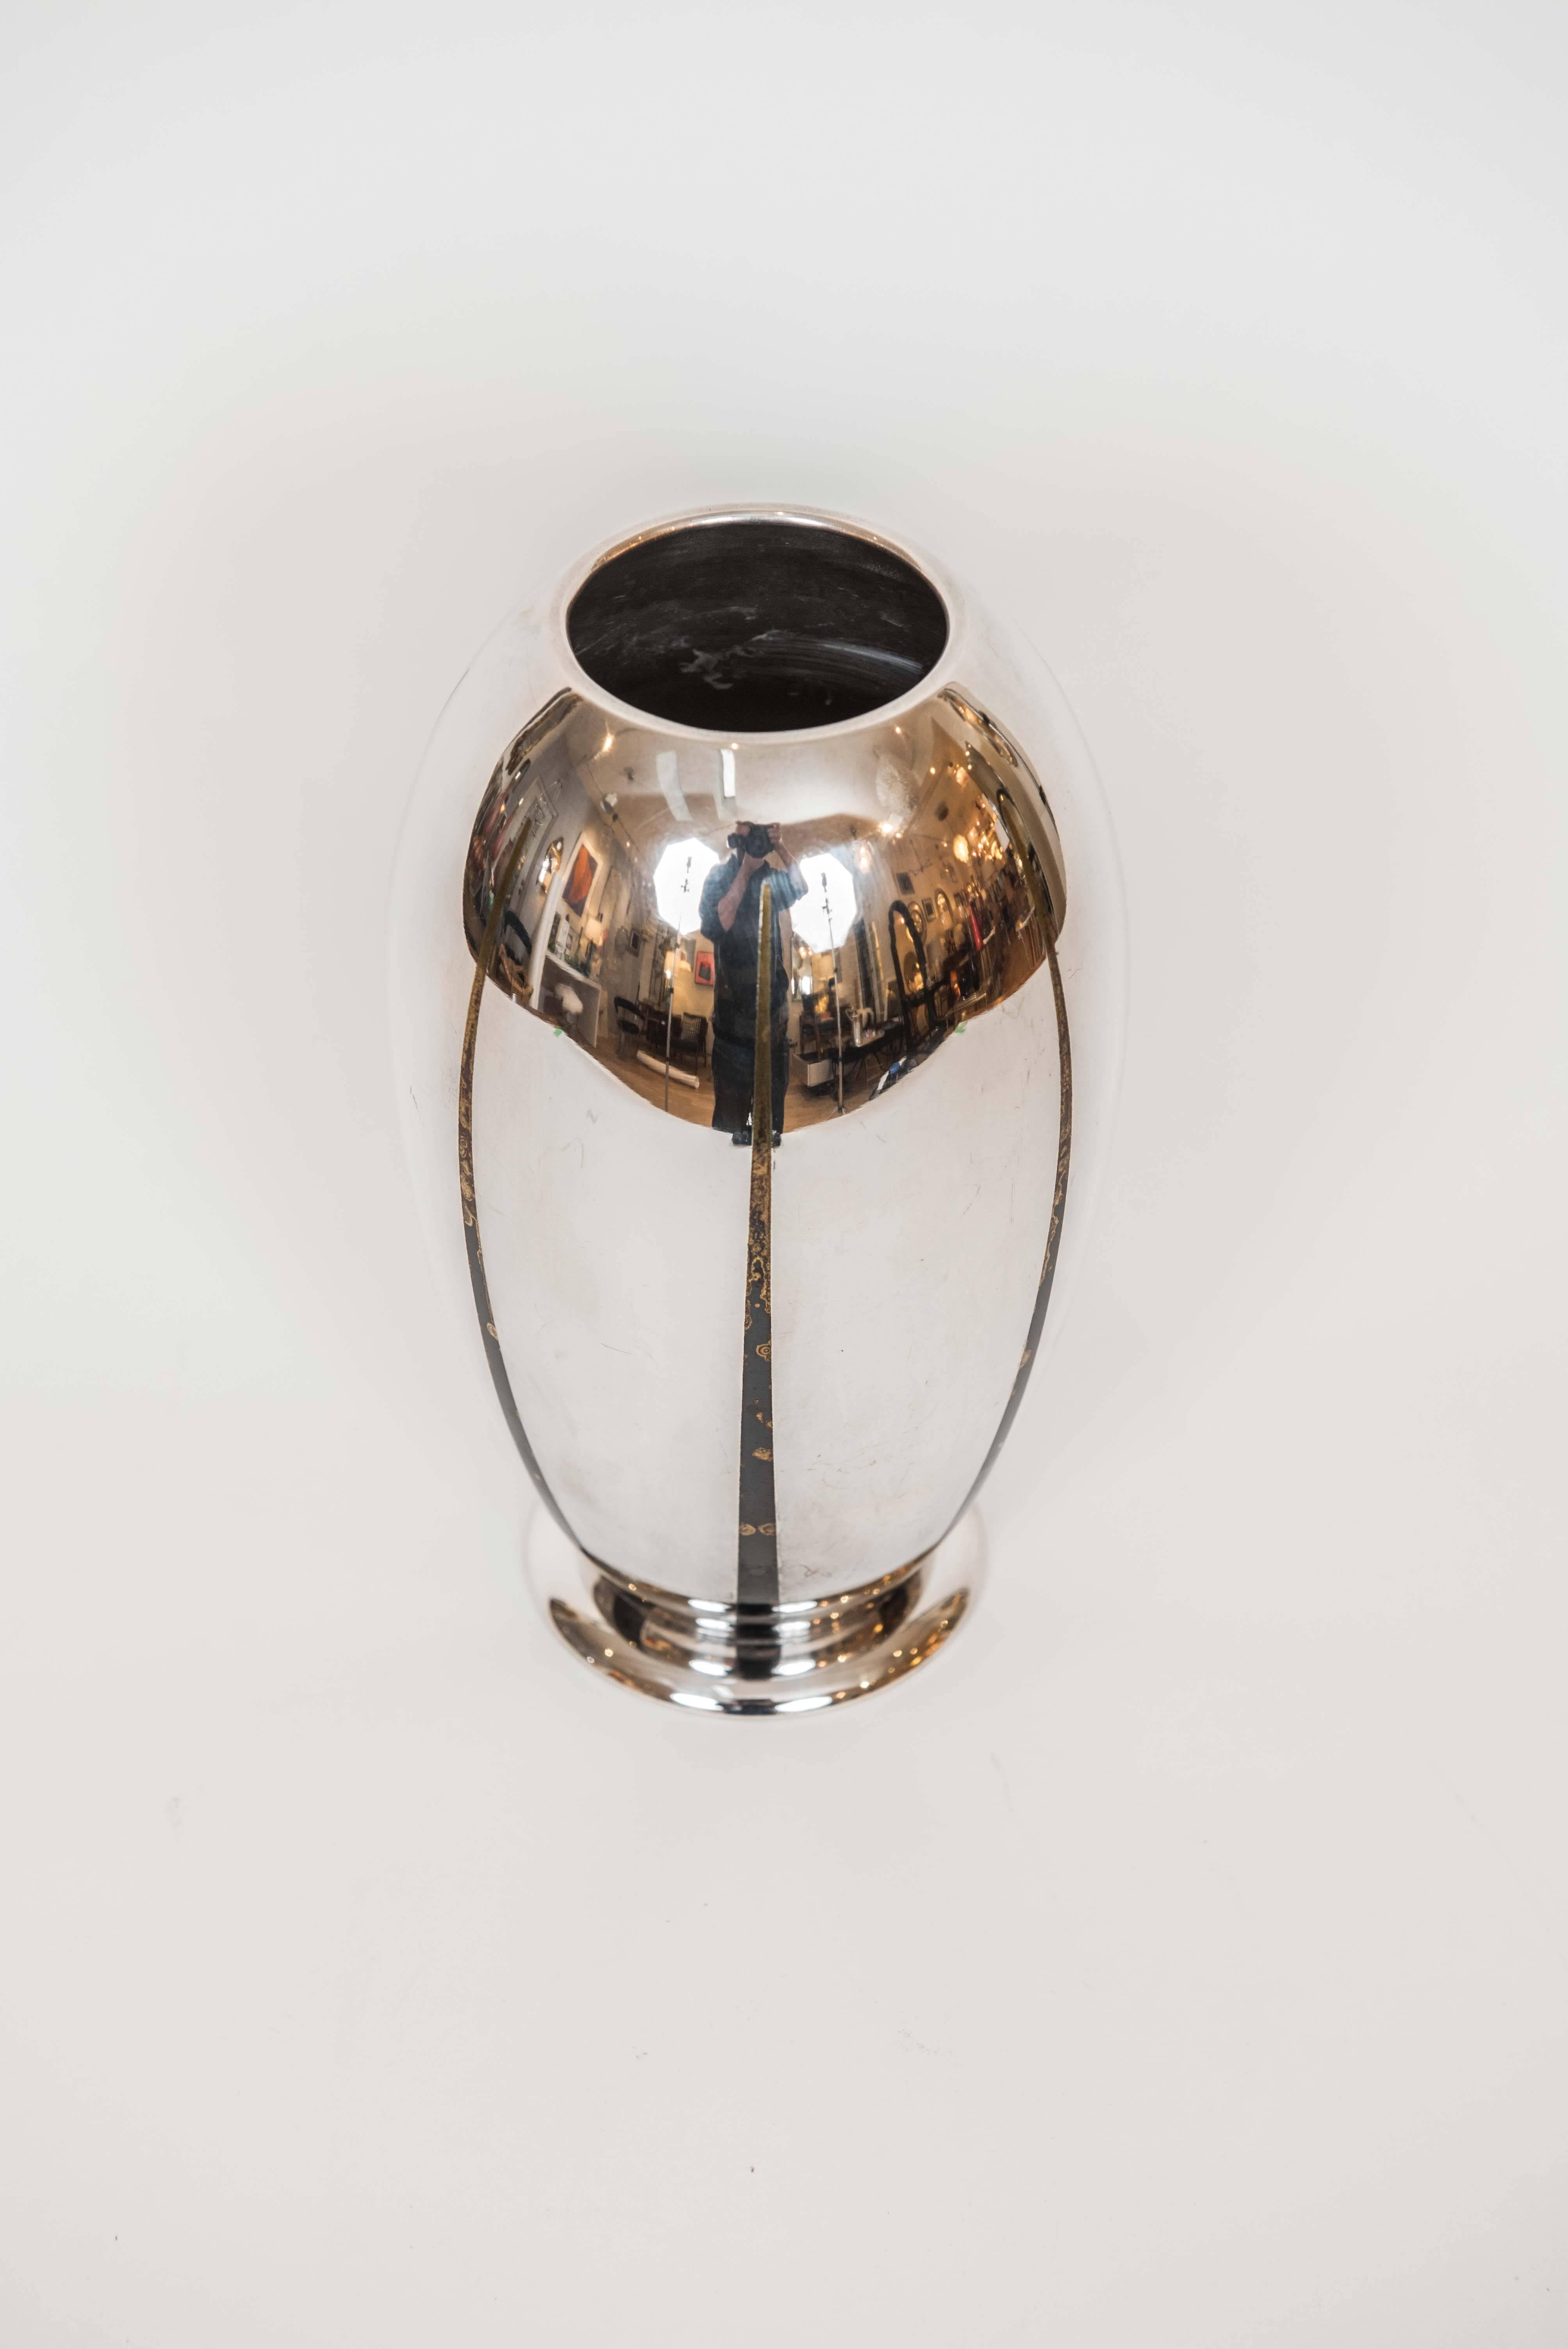 This gleaming Art Deco vase in silver plate is accented with distressed bronze
highlights and is in excellent vintage condition. There are no dents or dings and
the 